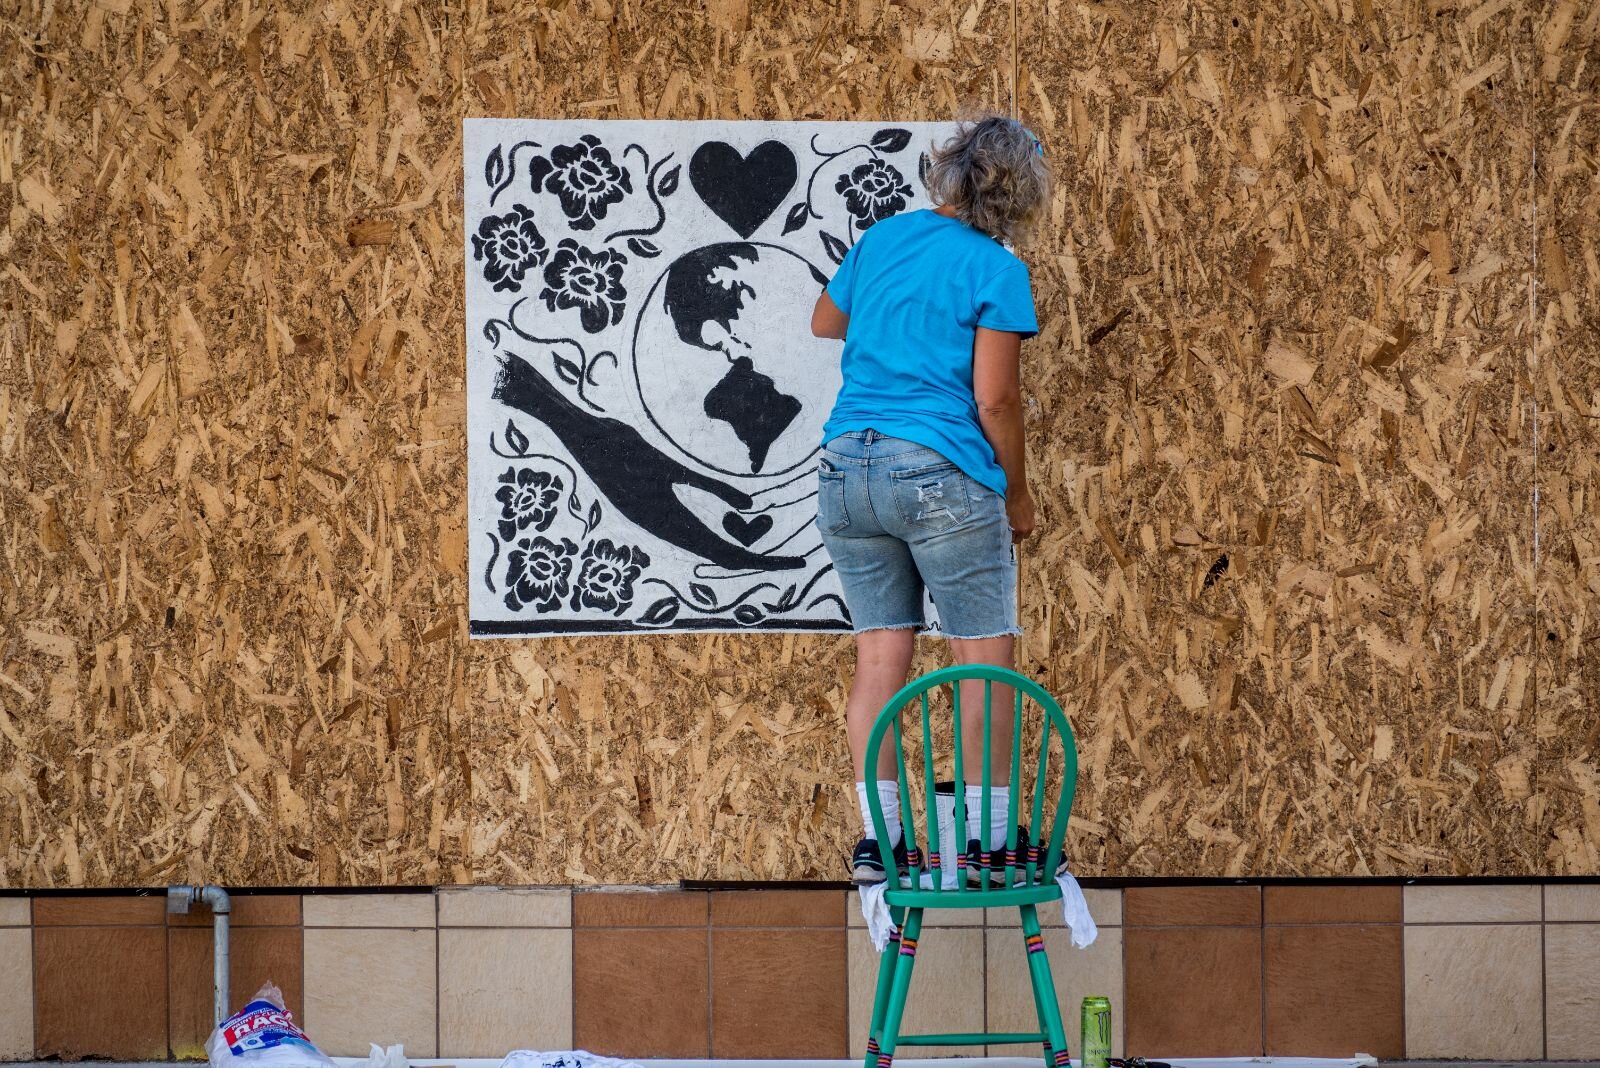 Artists converged on downtown Kalamazoo Saturday and Sunday to turn boarded up storefronts into art spaces.